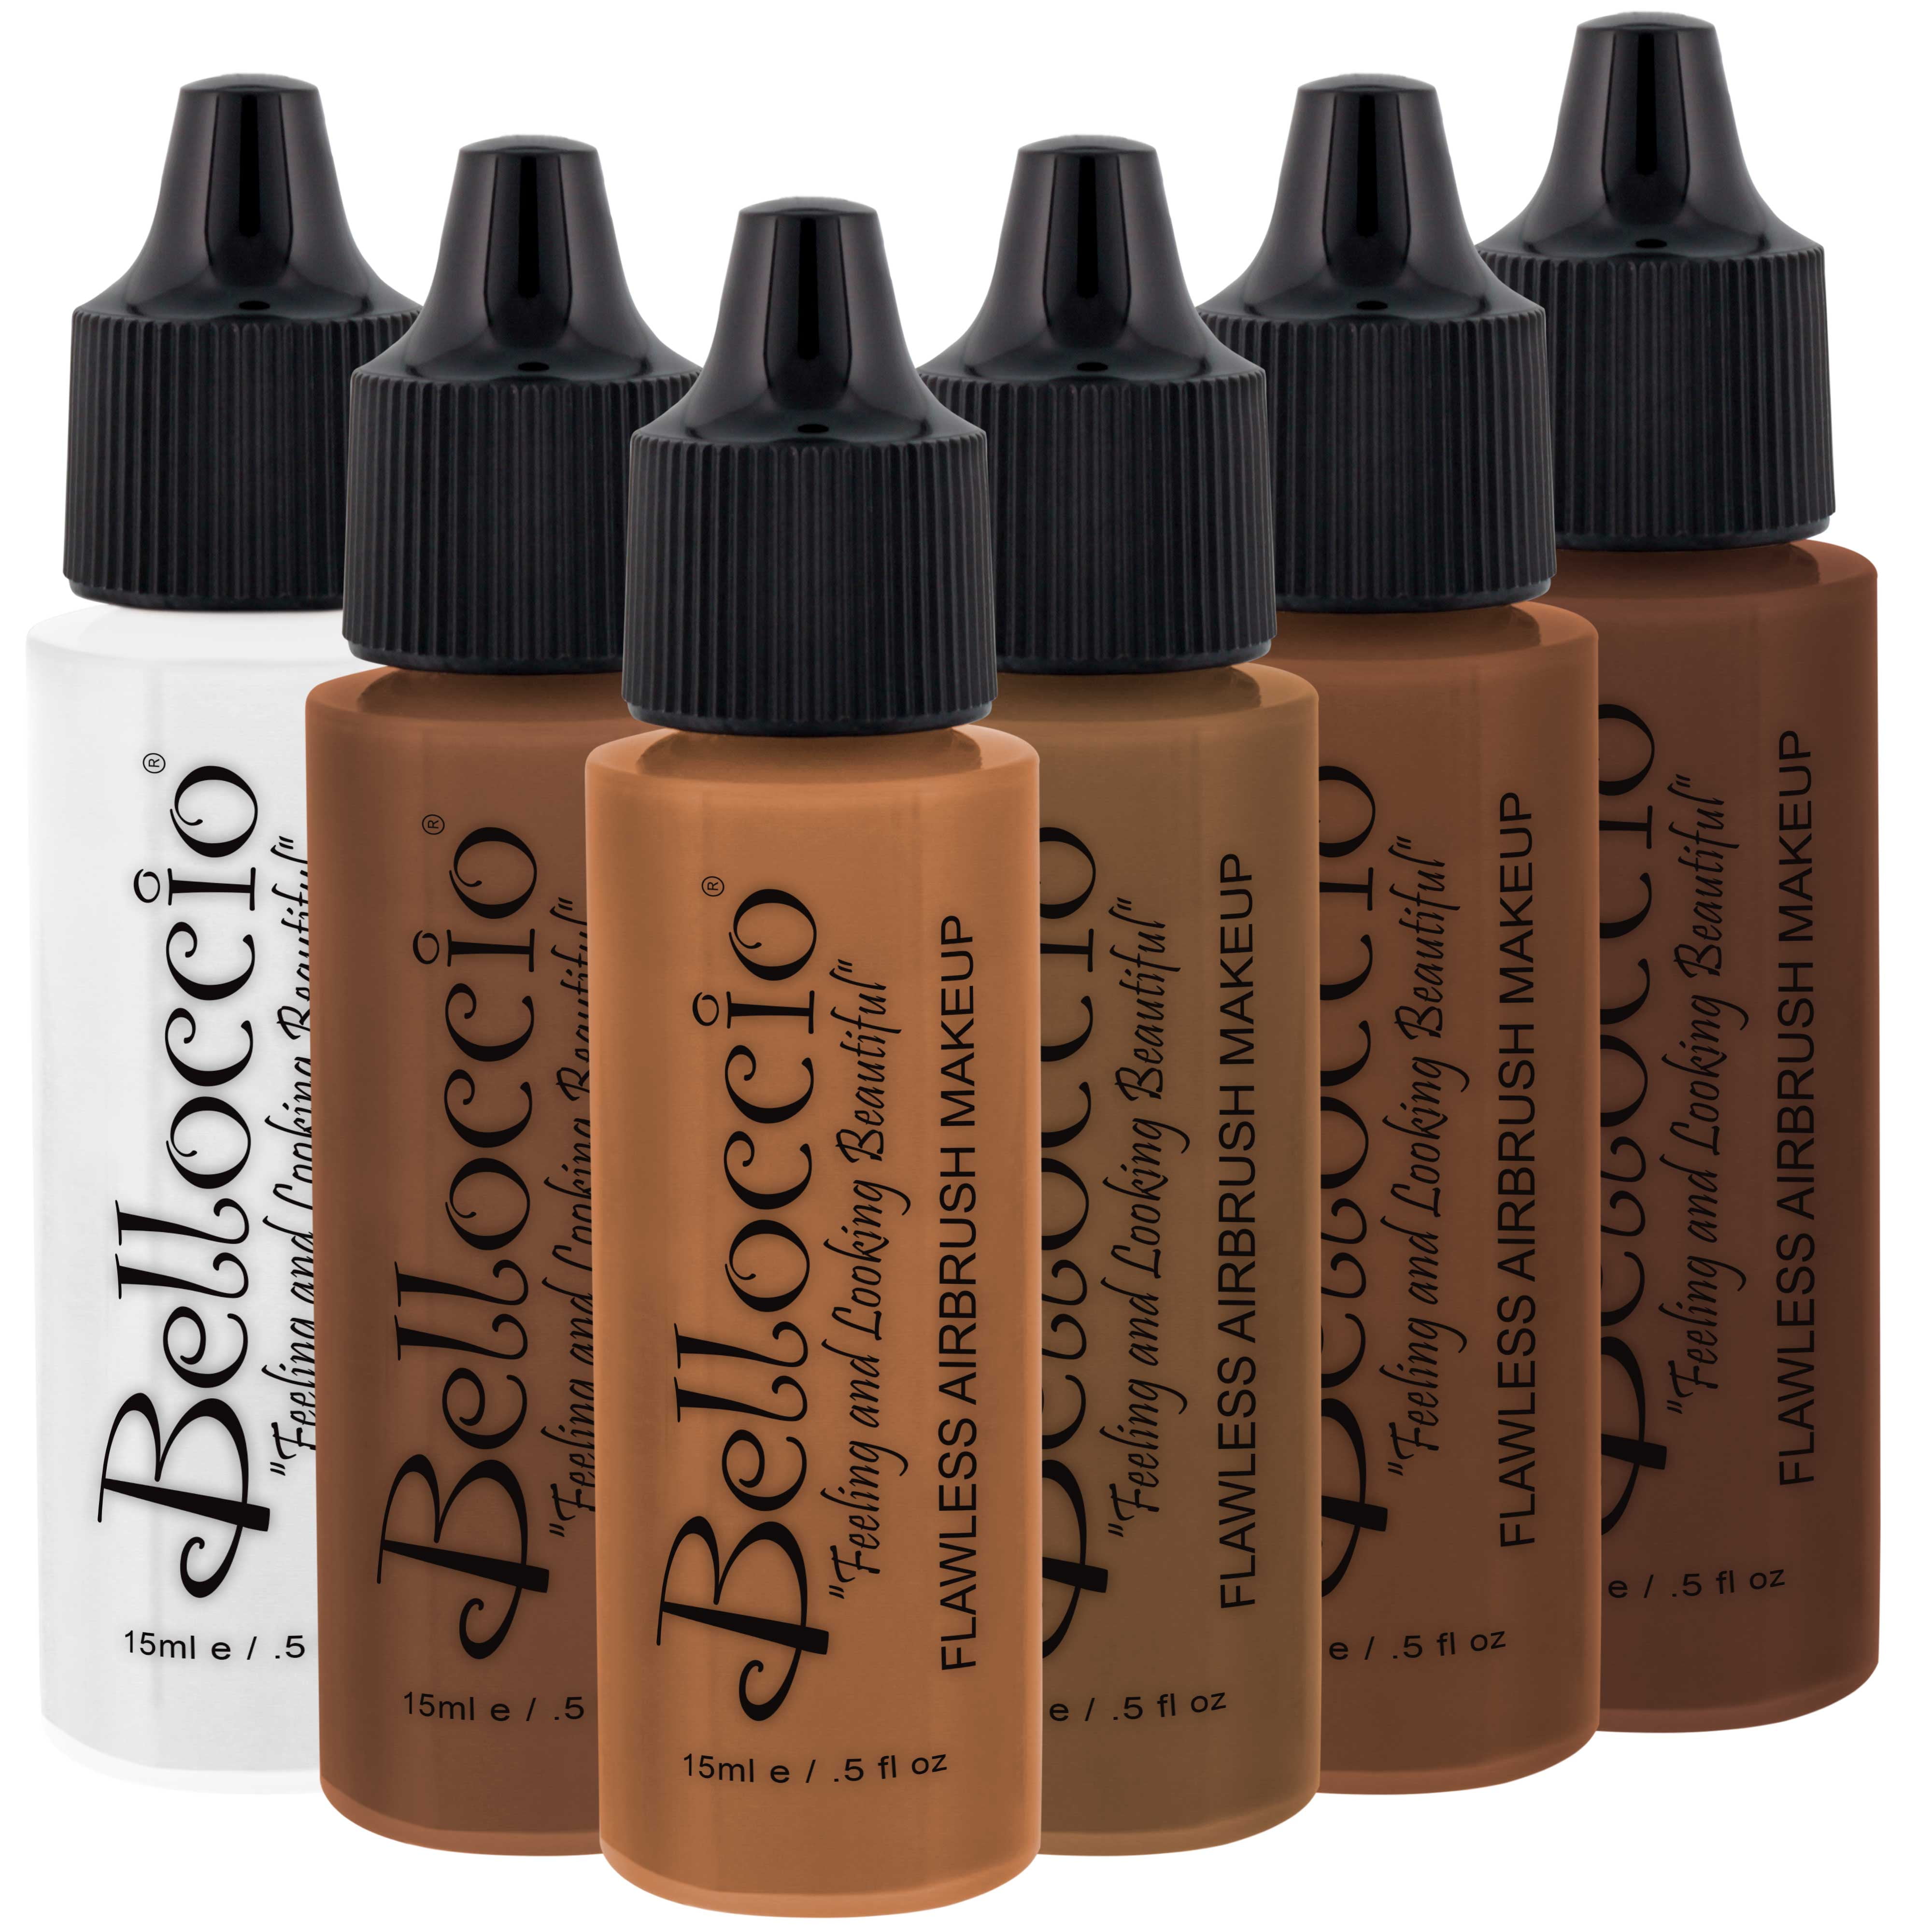 Belloccio Airbrush Cosmetic Makeup System with a MASTER SET of All 17  Foundation Shades plus Blush, Shimmer and Bronzer All in 1/2 oz bottles  Deluxe 1/2-Oz Set All 17 Shades